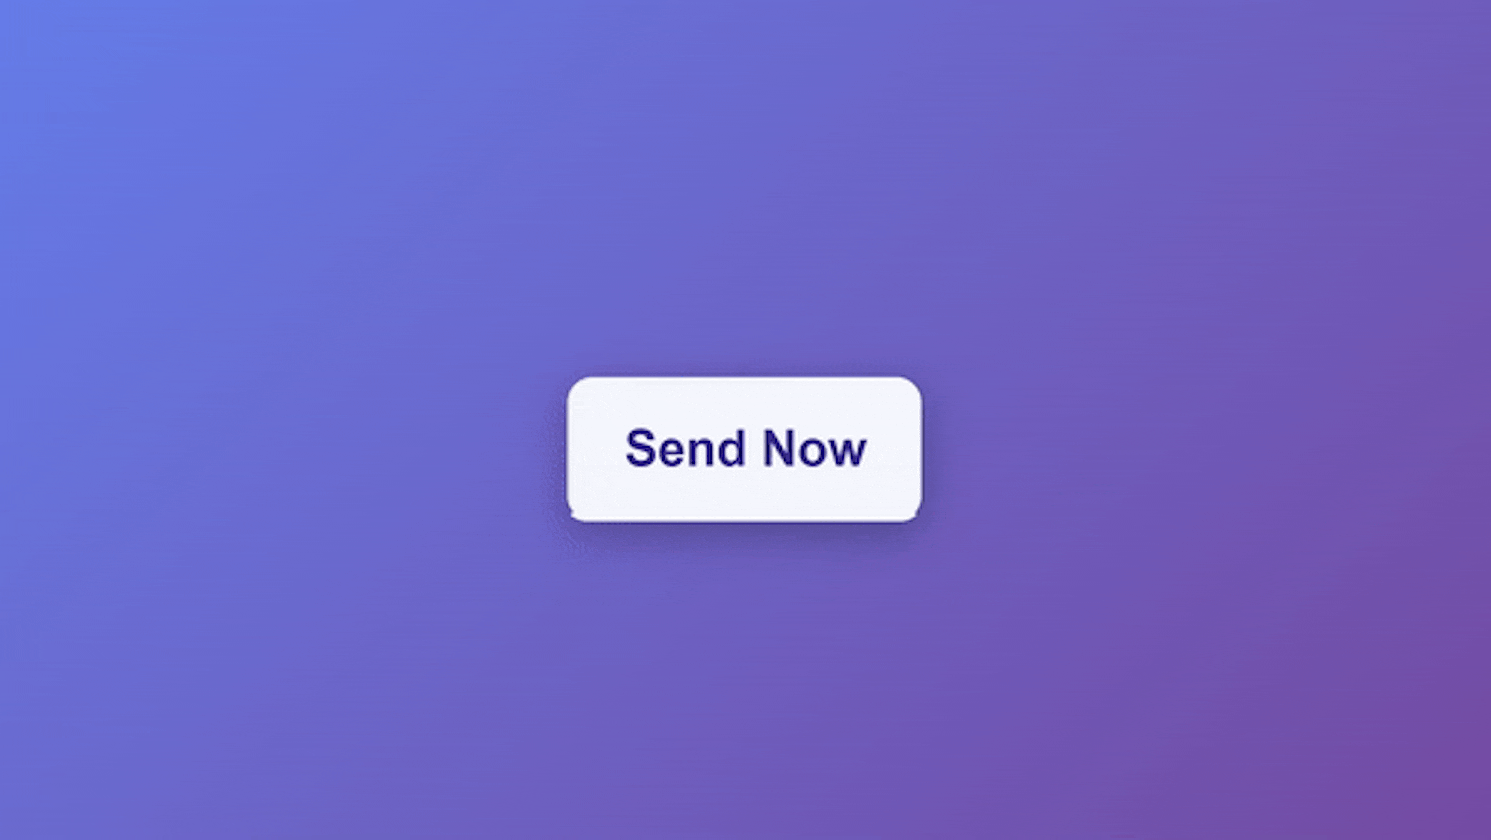 Creating an Animated Paper Plane Button Using HTML, CSS, and JavaScript